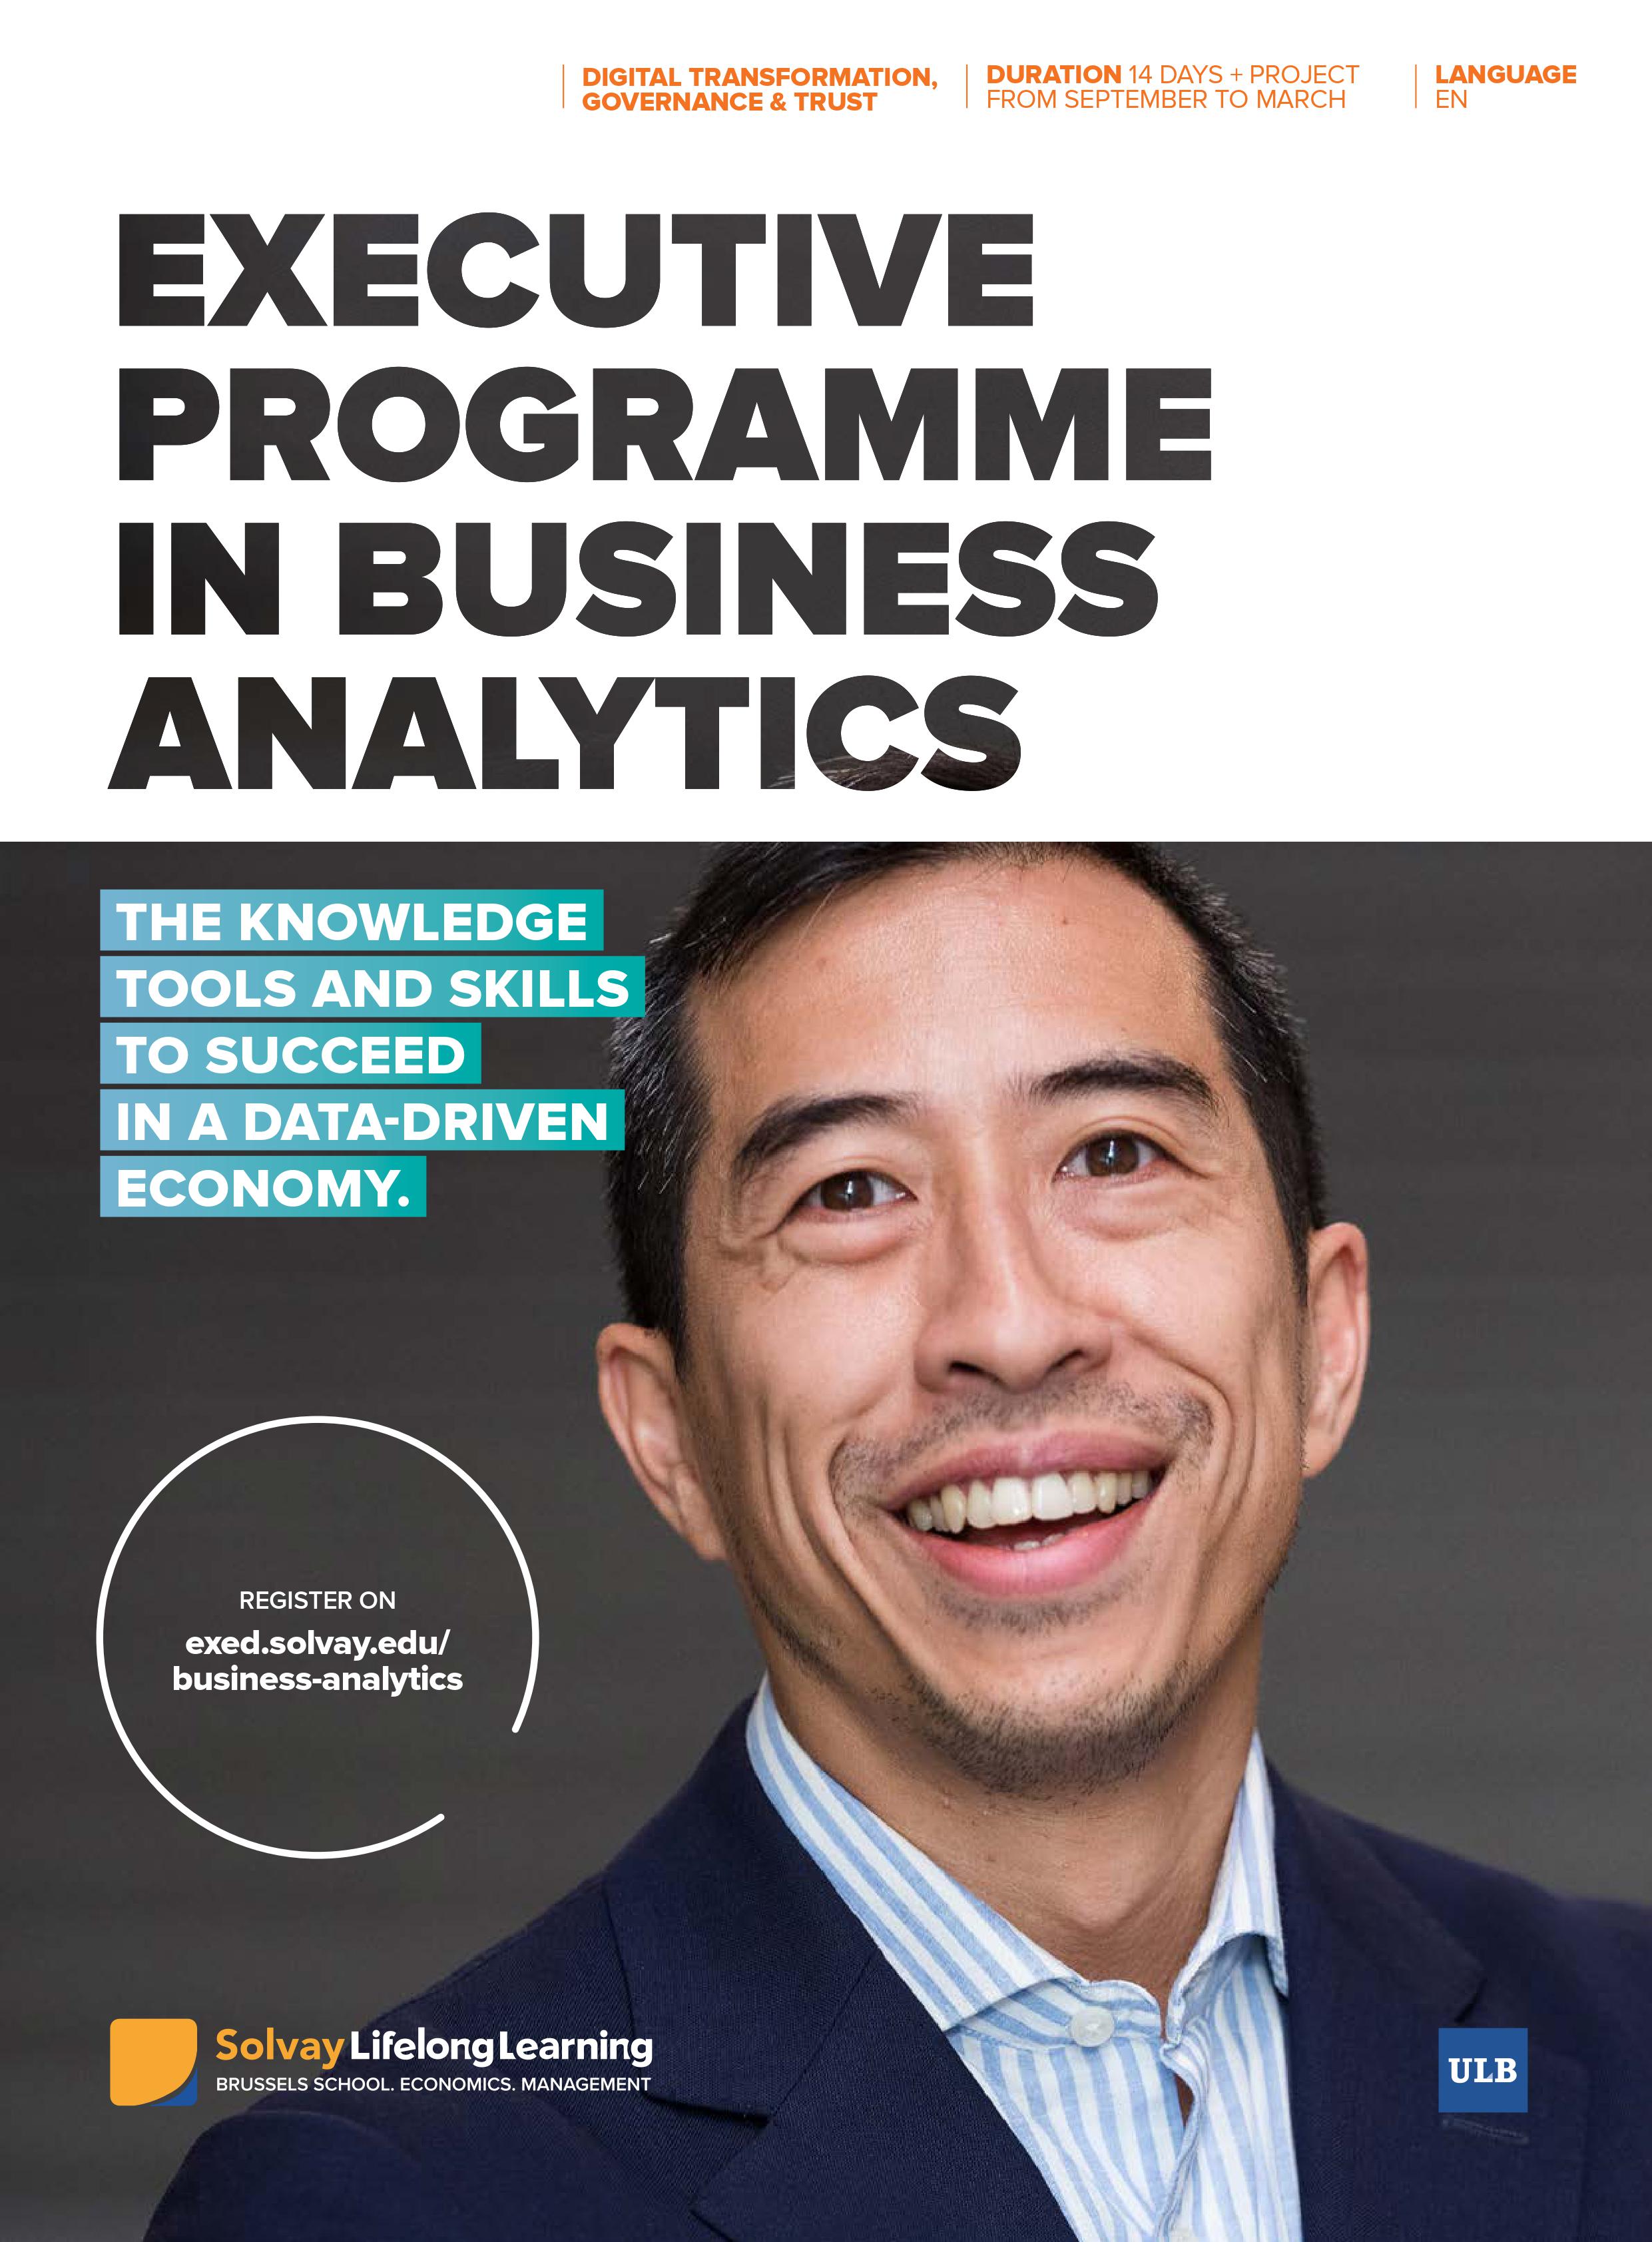 Image Front Brochure Executive Programme in Business Analytics